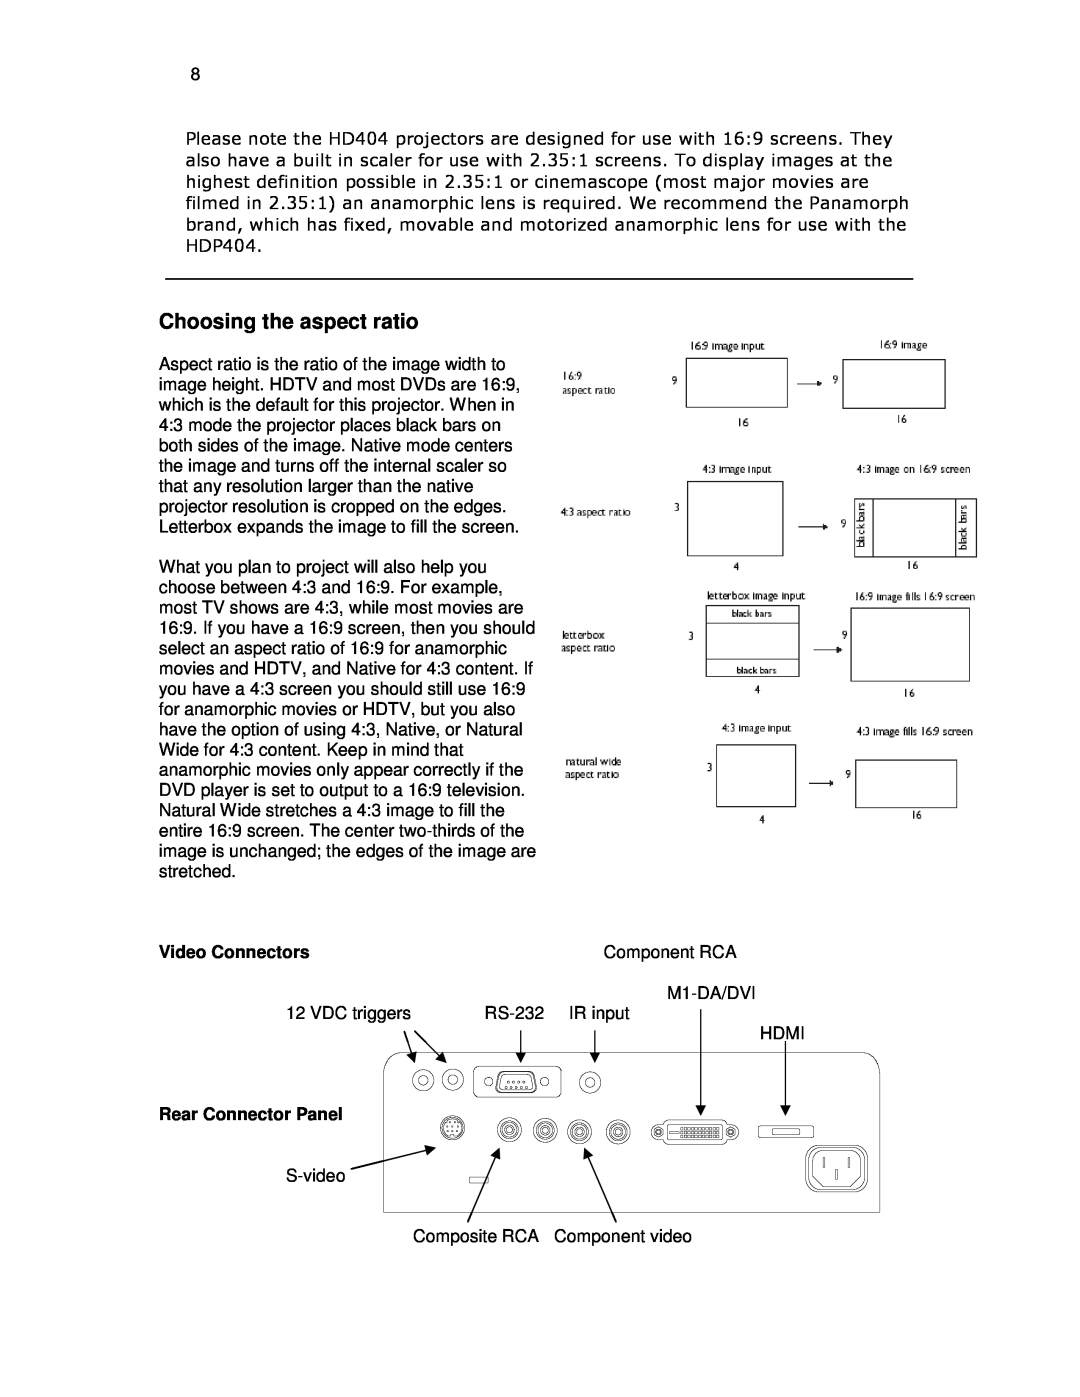 Knoll Systems HDP404 user manual Choosing the aspect ratio, Video Connectors, Rear Connector Panel 